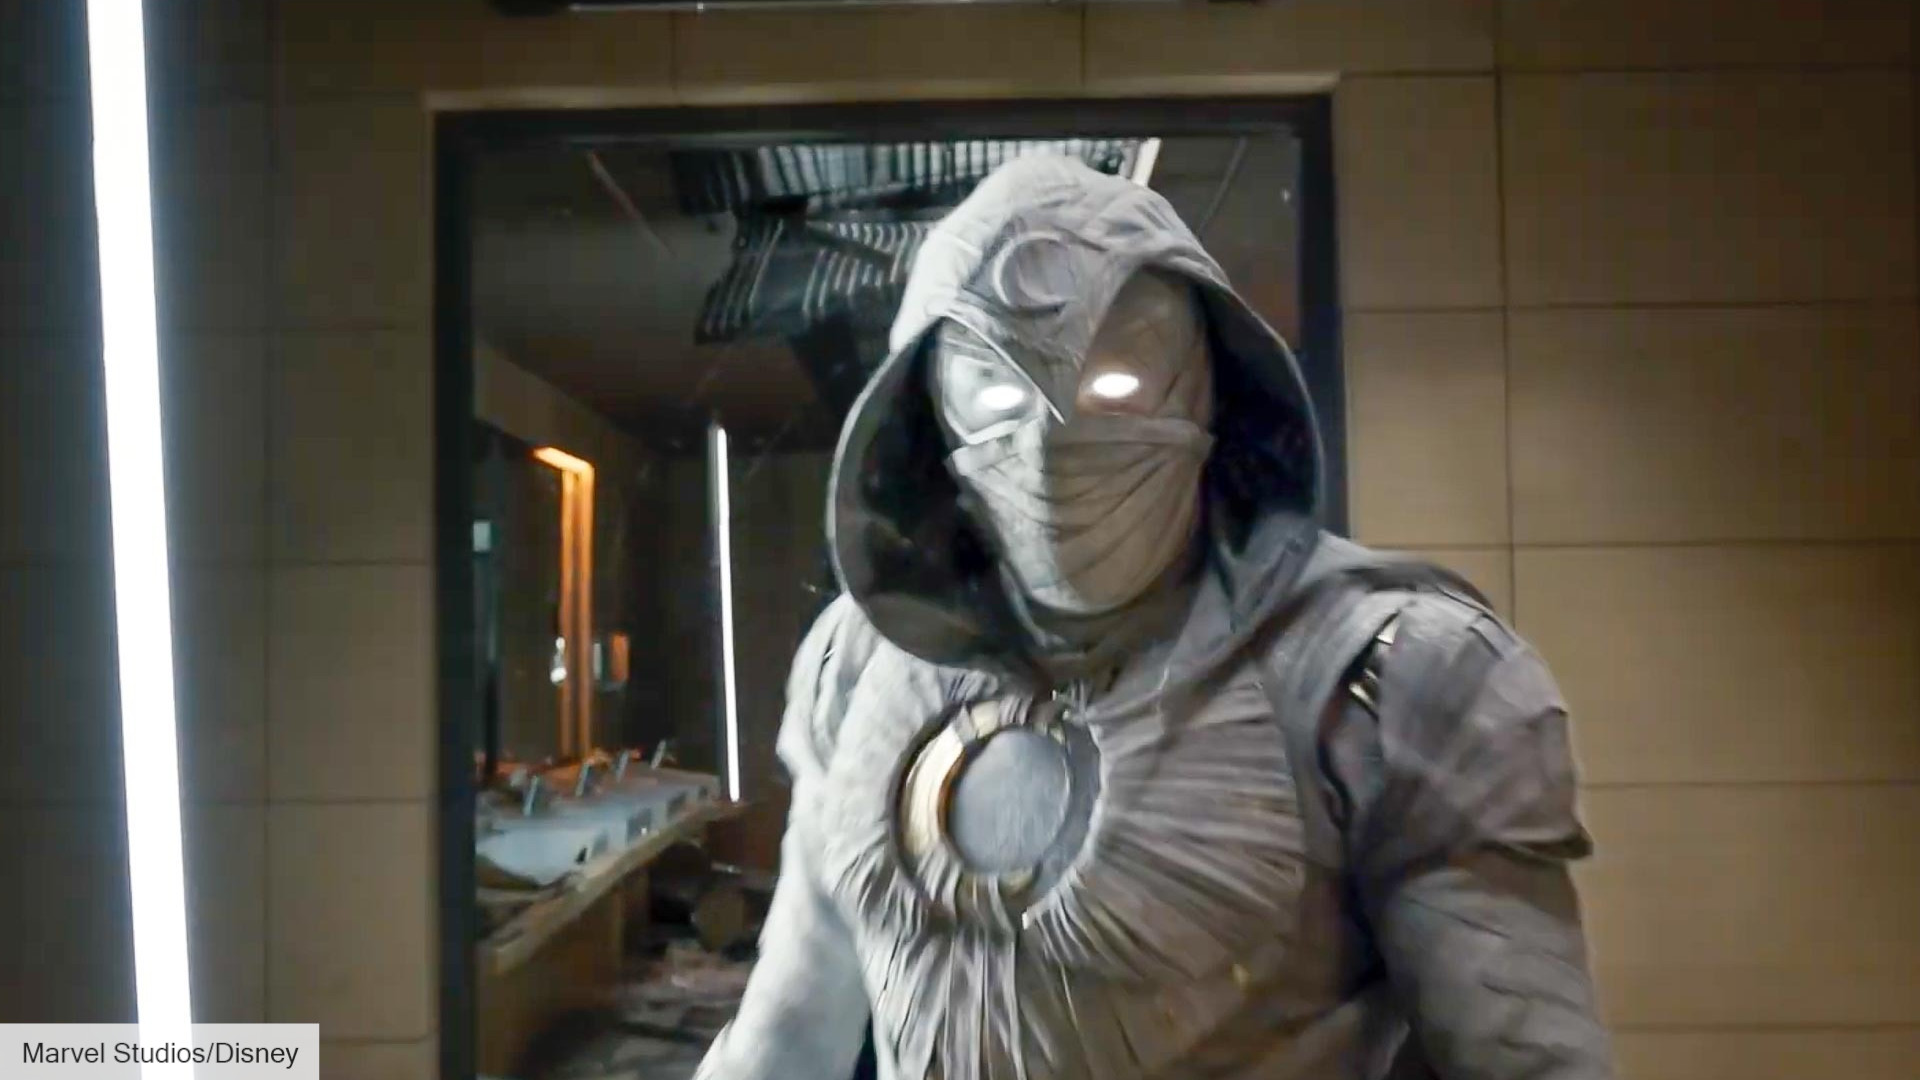 Moon Knight' Season 2 Is Not a Sure Thing